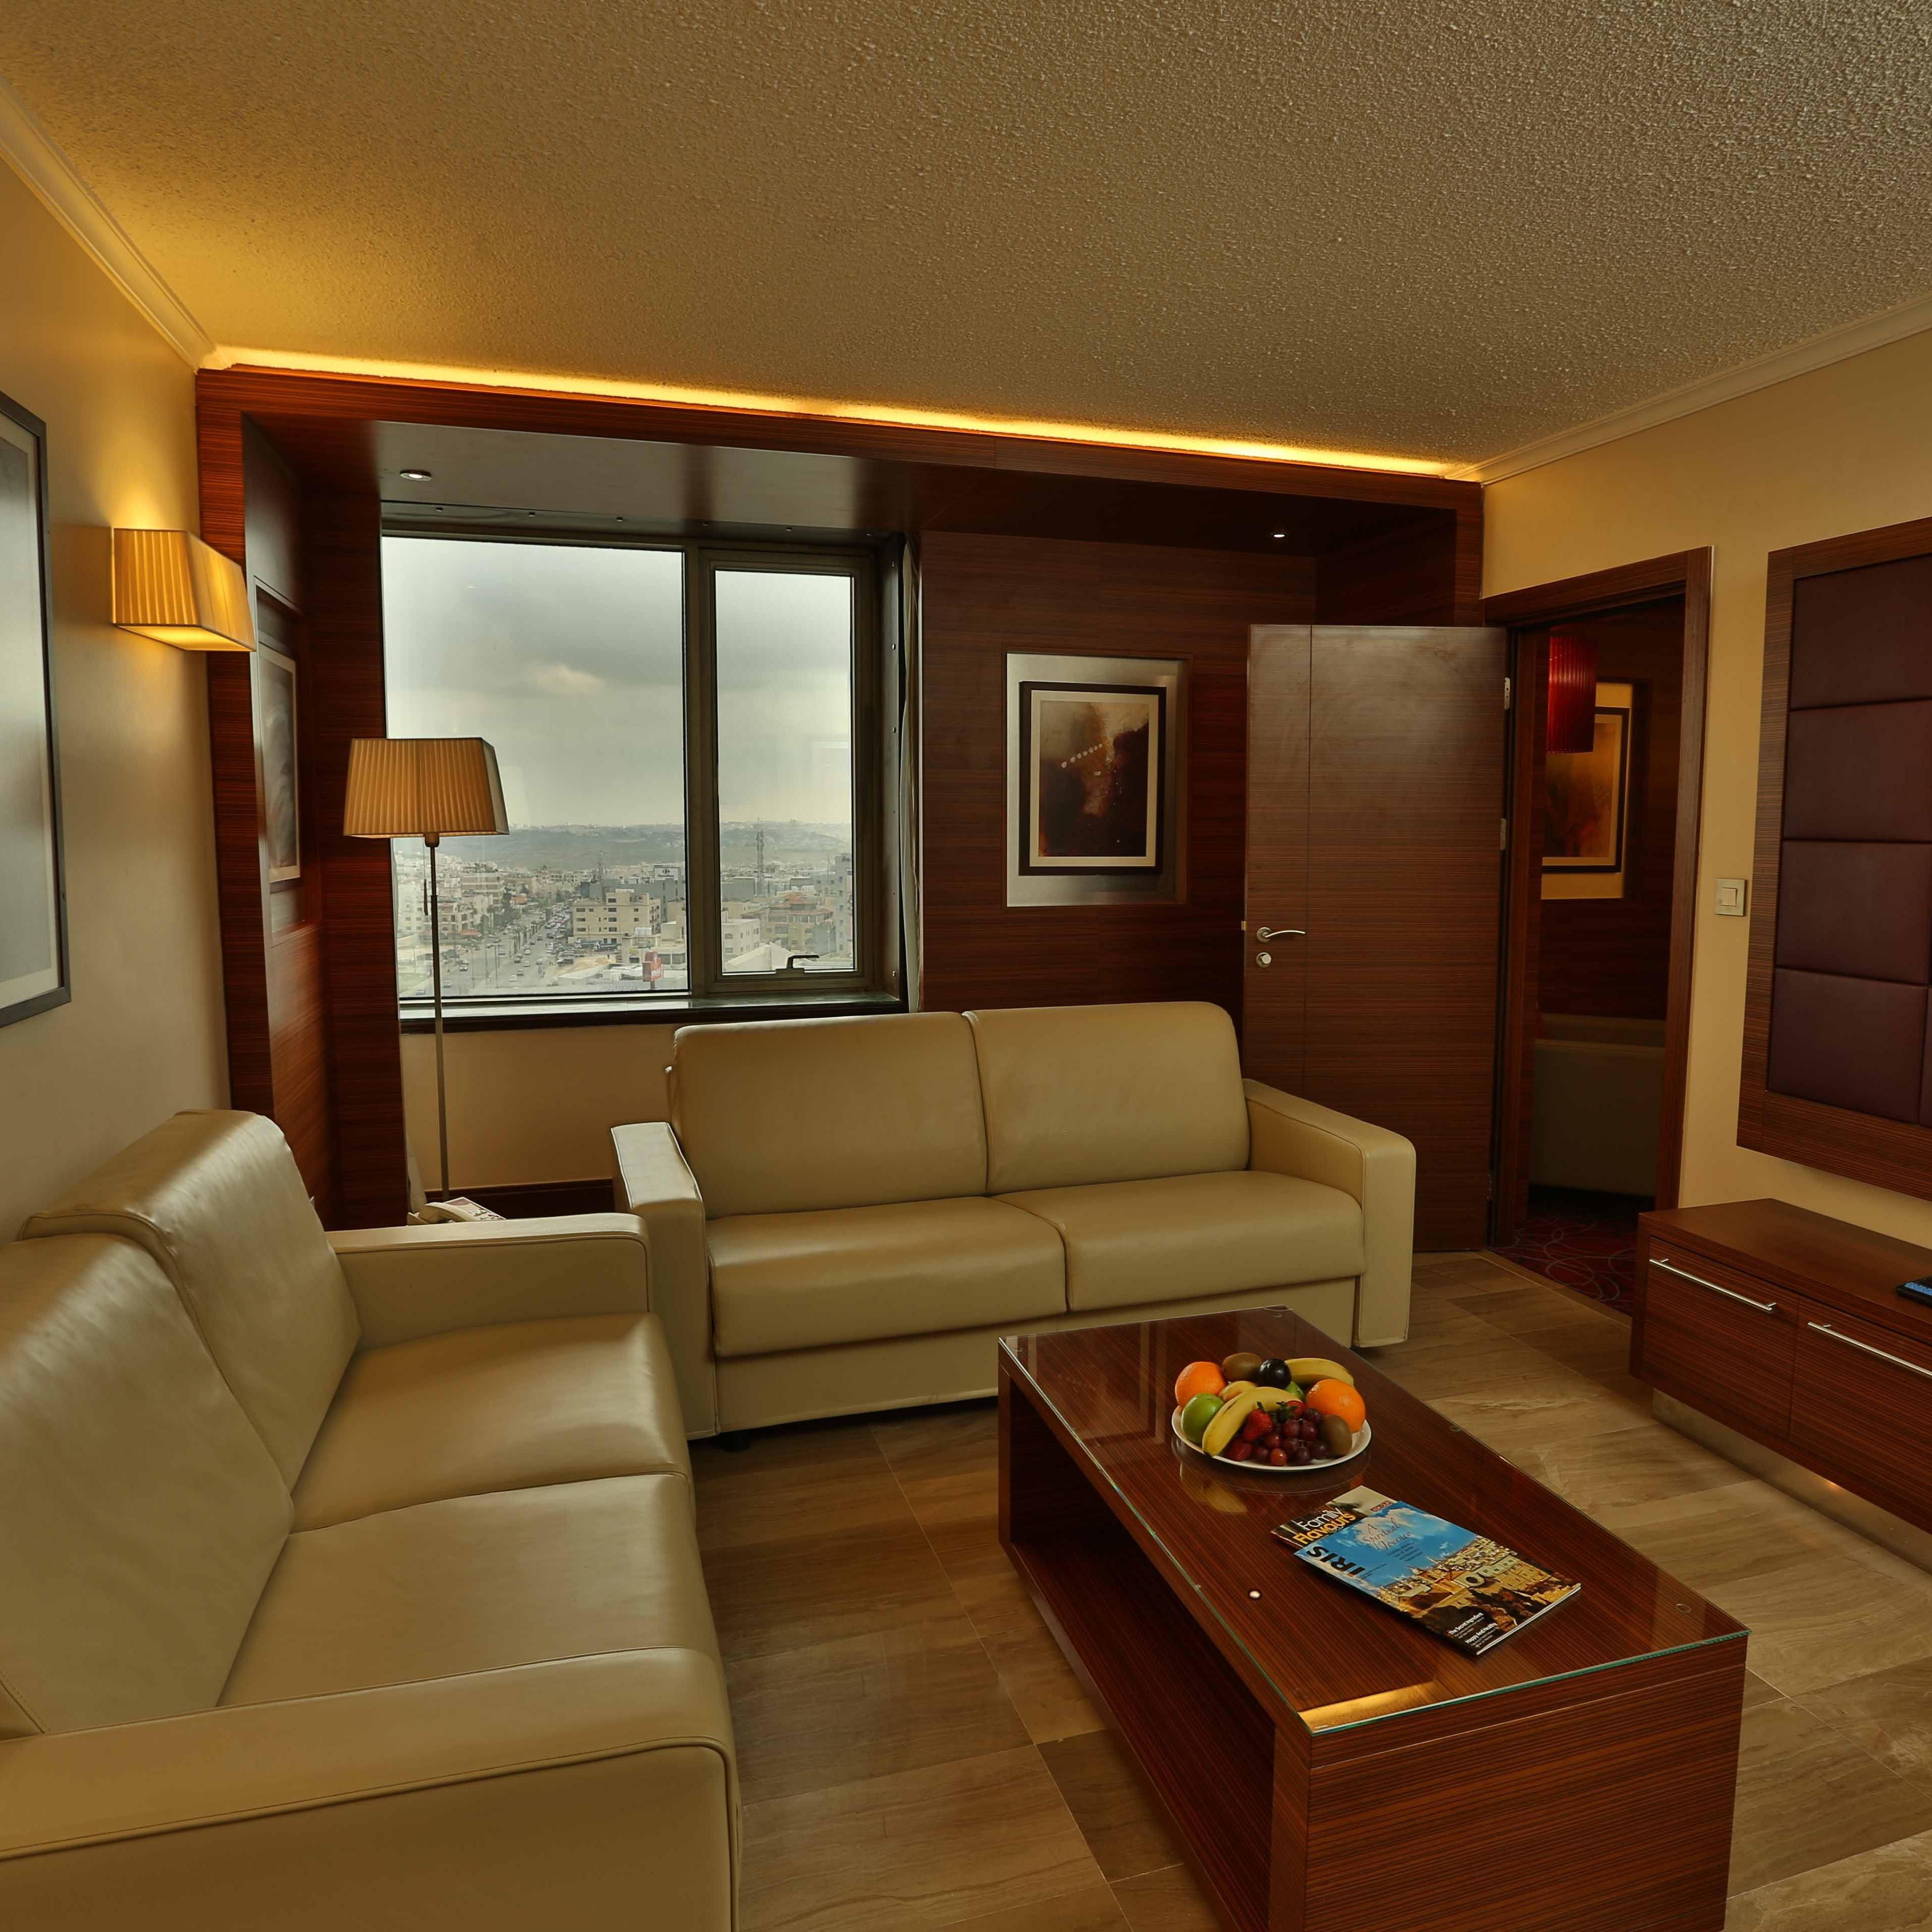 Feel at home away from home at our Executive Suite Living Area